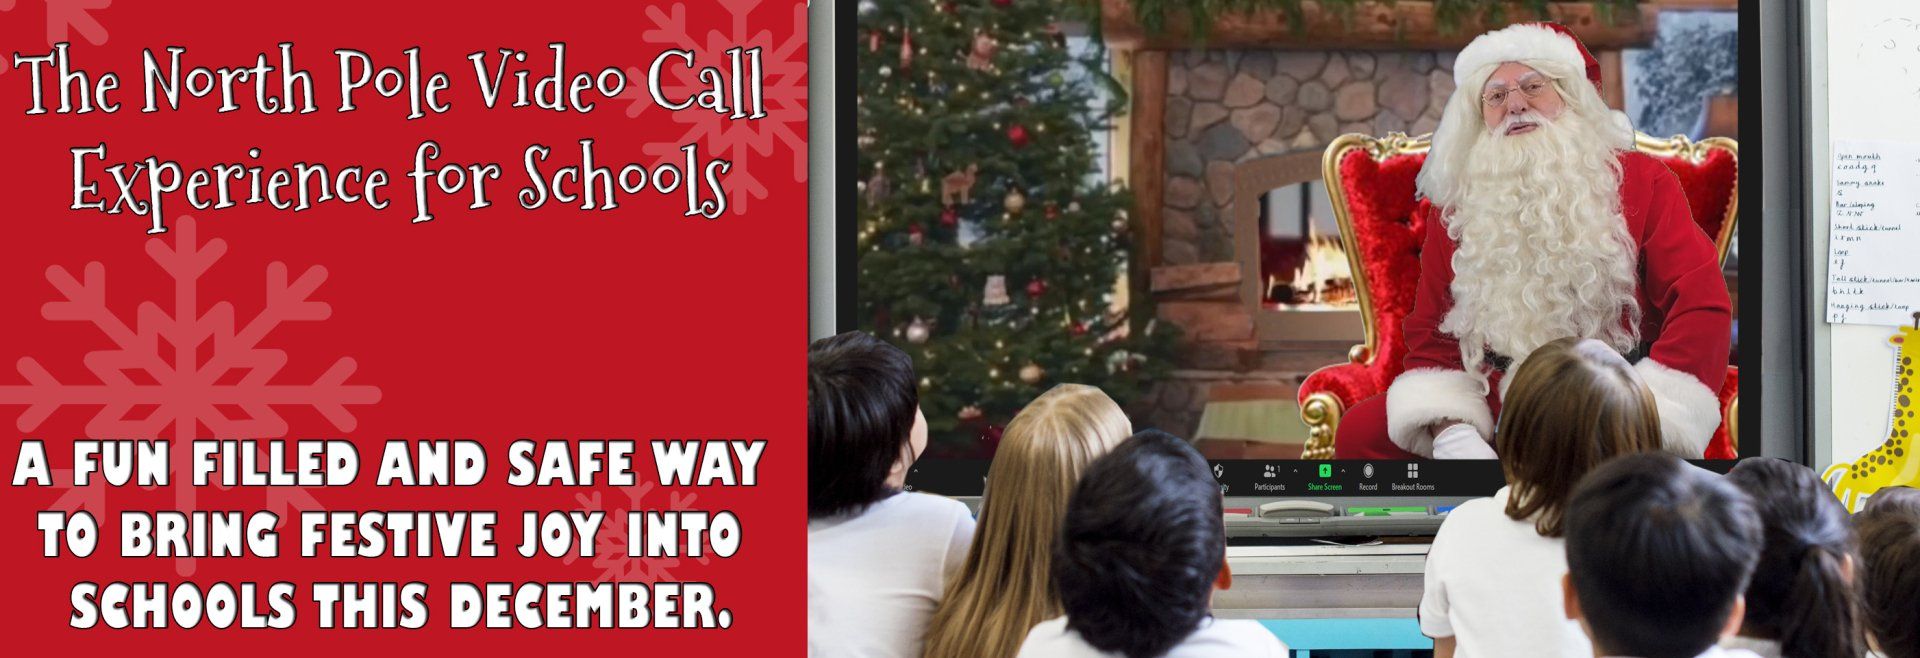 Live video call from Santa for Schools